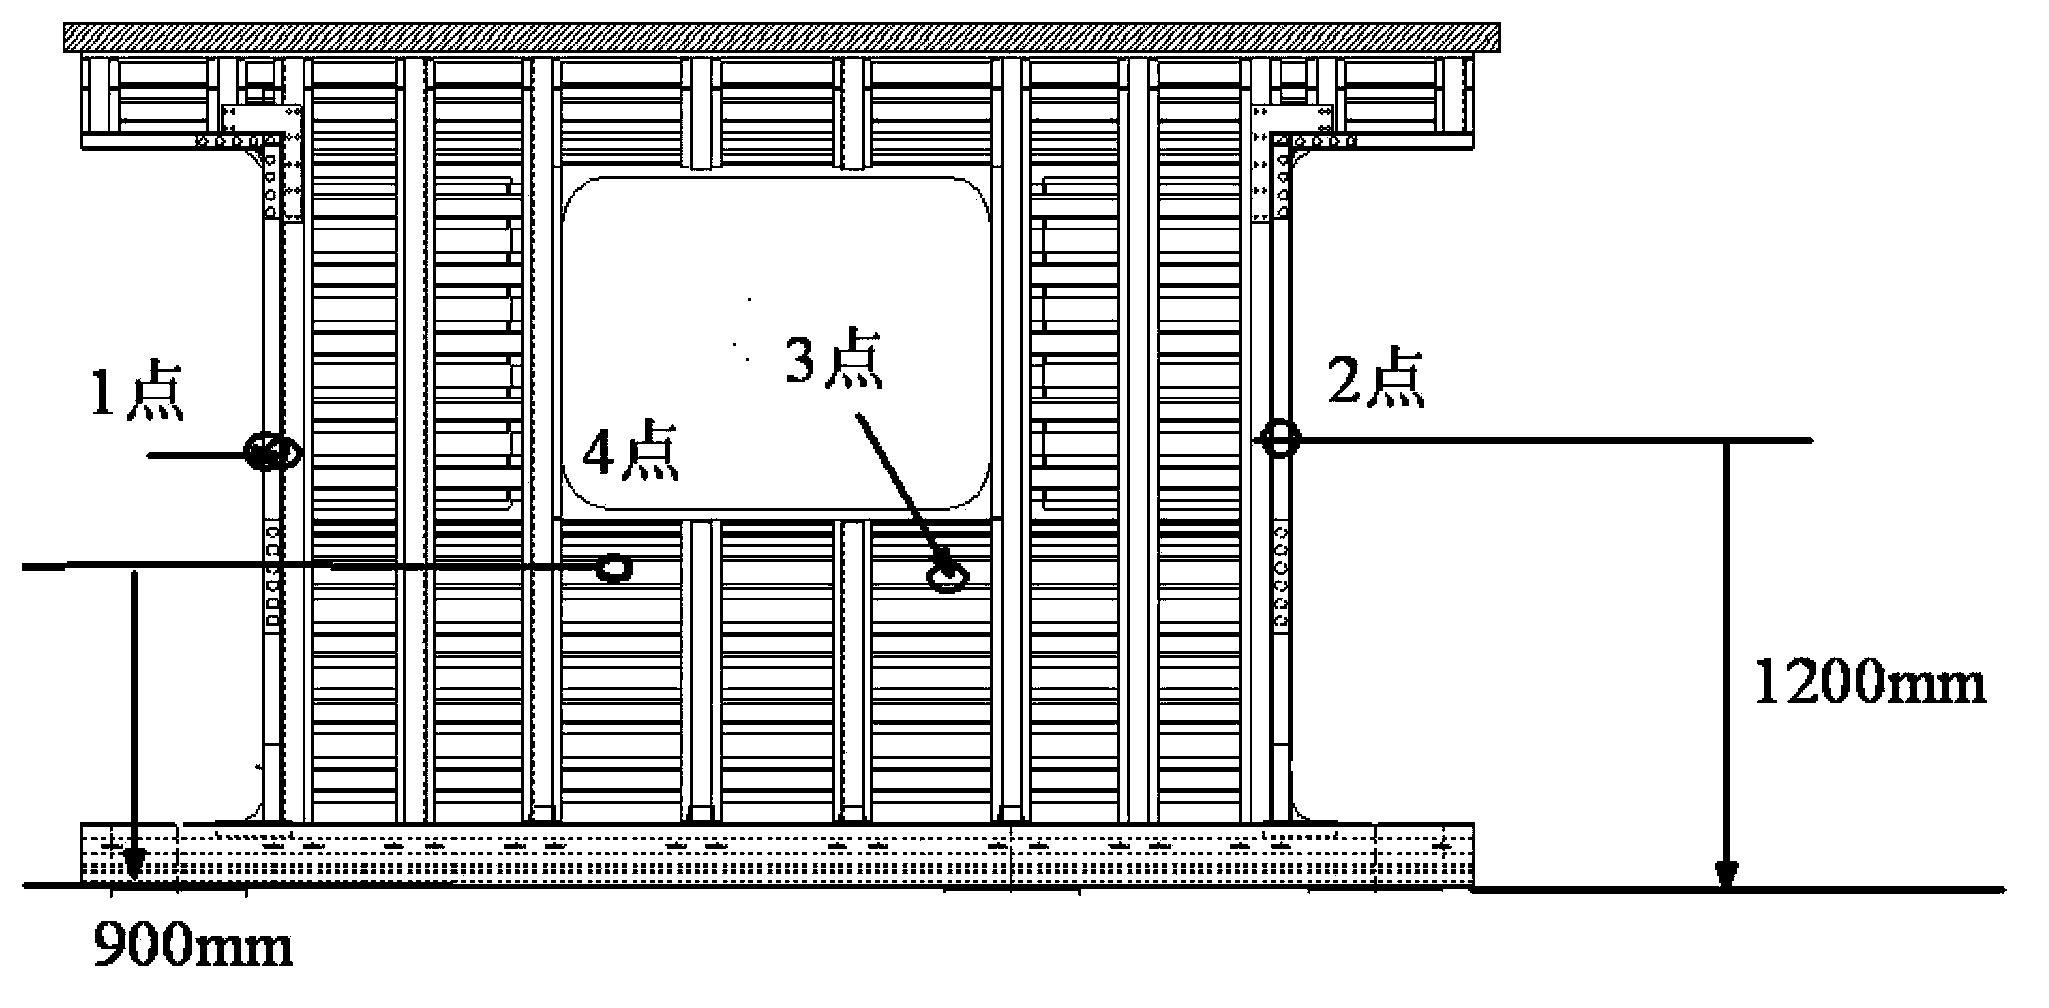 Rail vehicle body structure large-size component fatigue test method and device